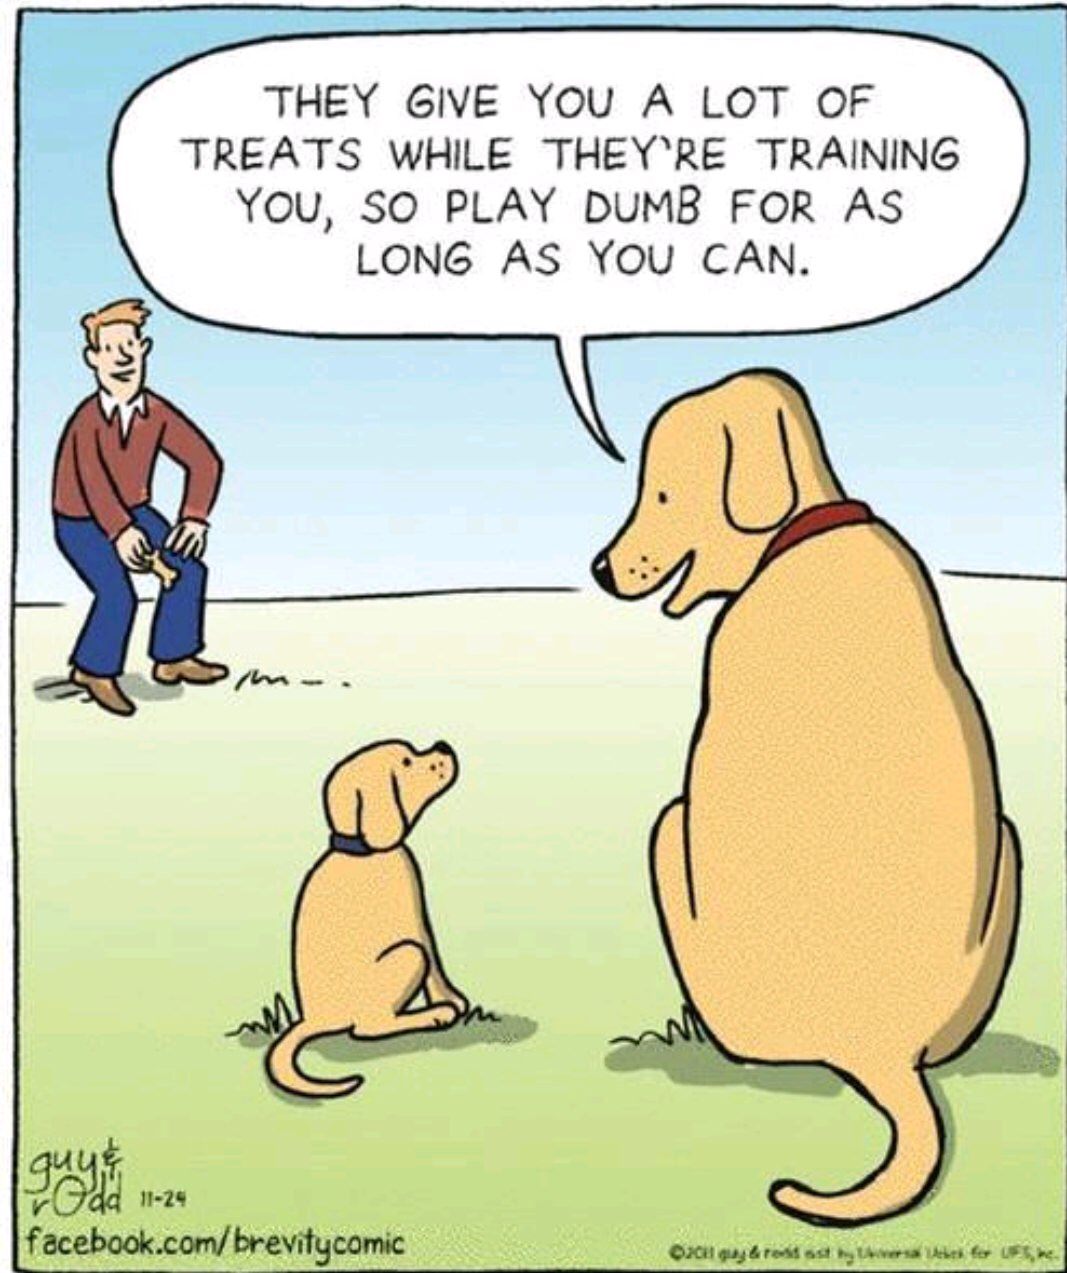 memes - funny dog cartoons - They Give You A Lot Of Treats While They'Re Training You, So Play Dumb For As Long As You Can. facebook.combrevitycomic Oculqurasdast tversake for